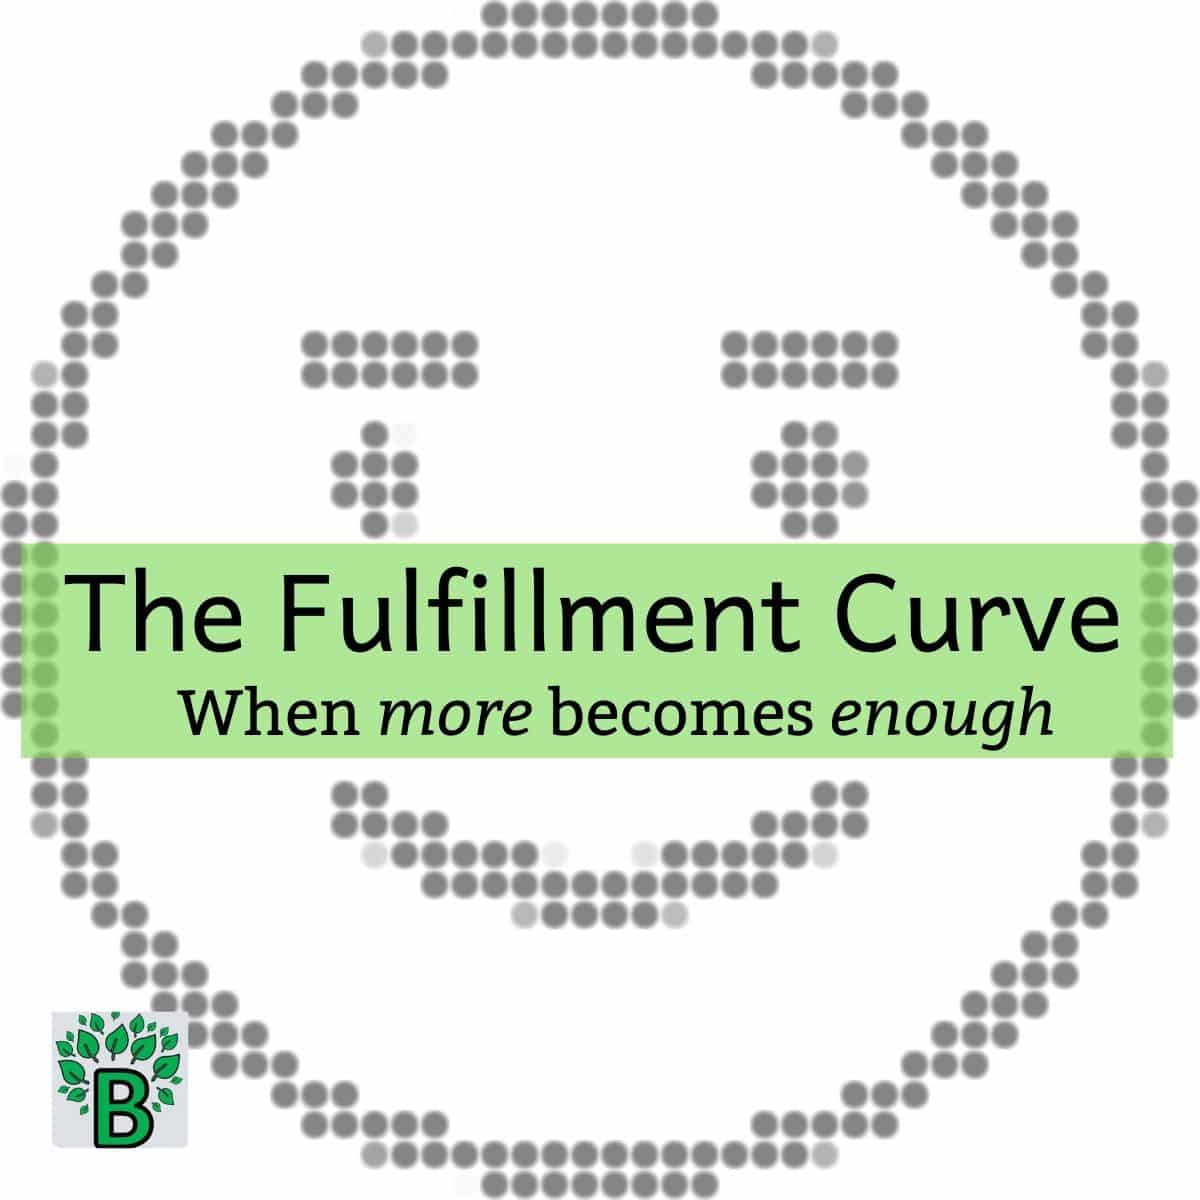 What's the fulfillment curve